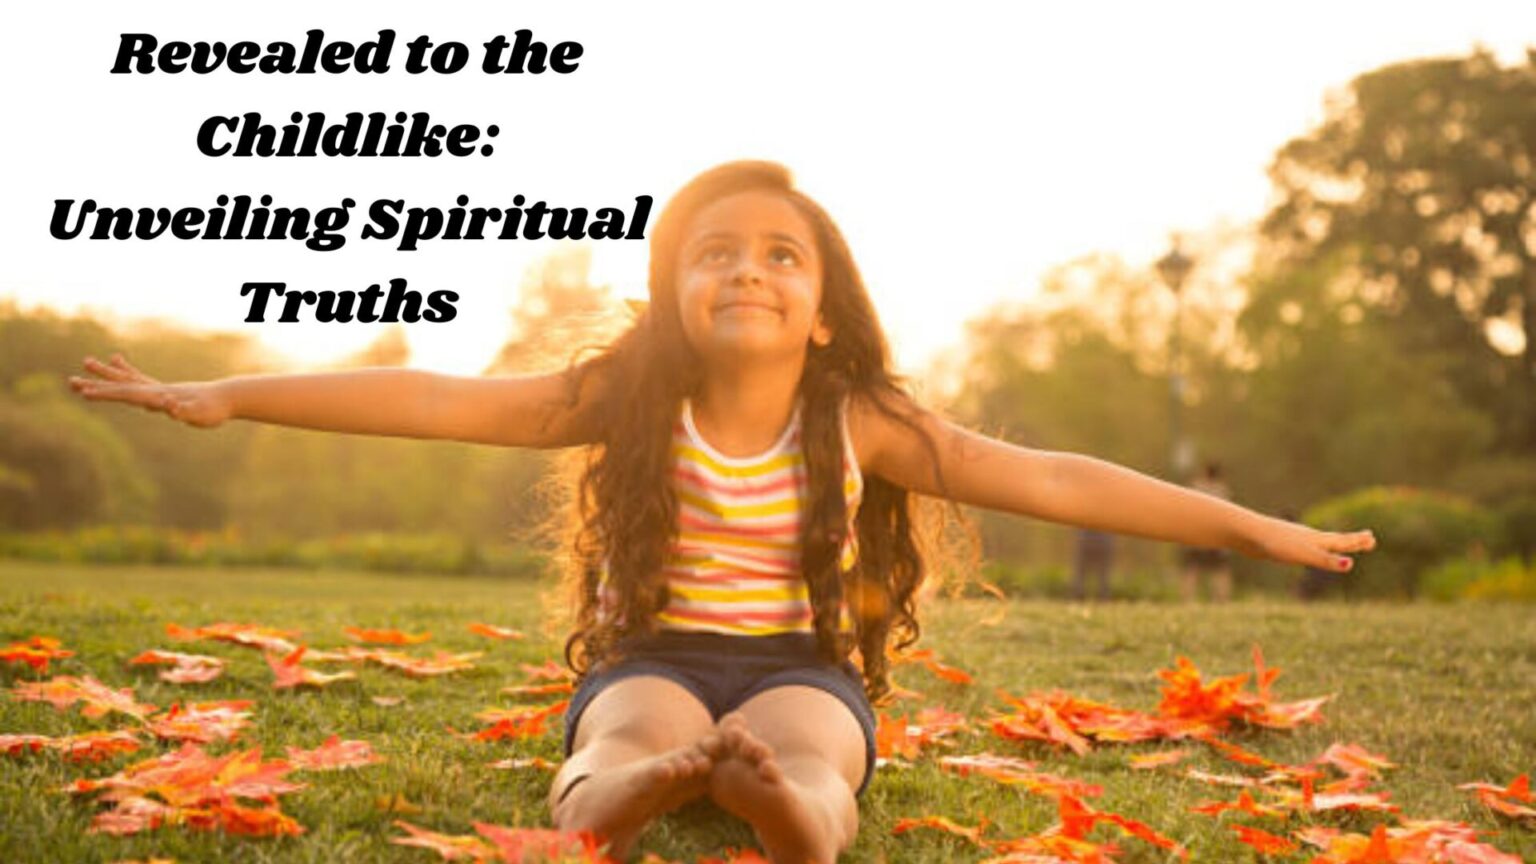 Revealed to the Childlike: Unveiling Spiritual Truths